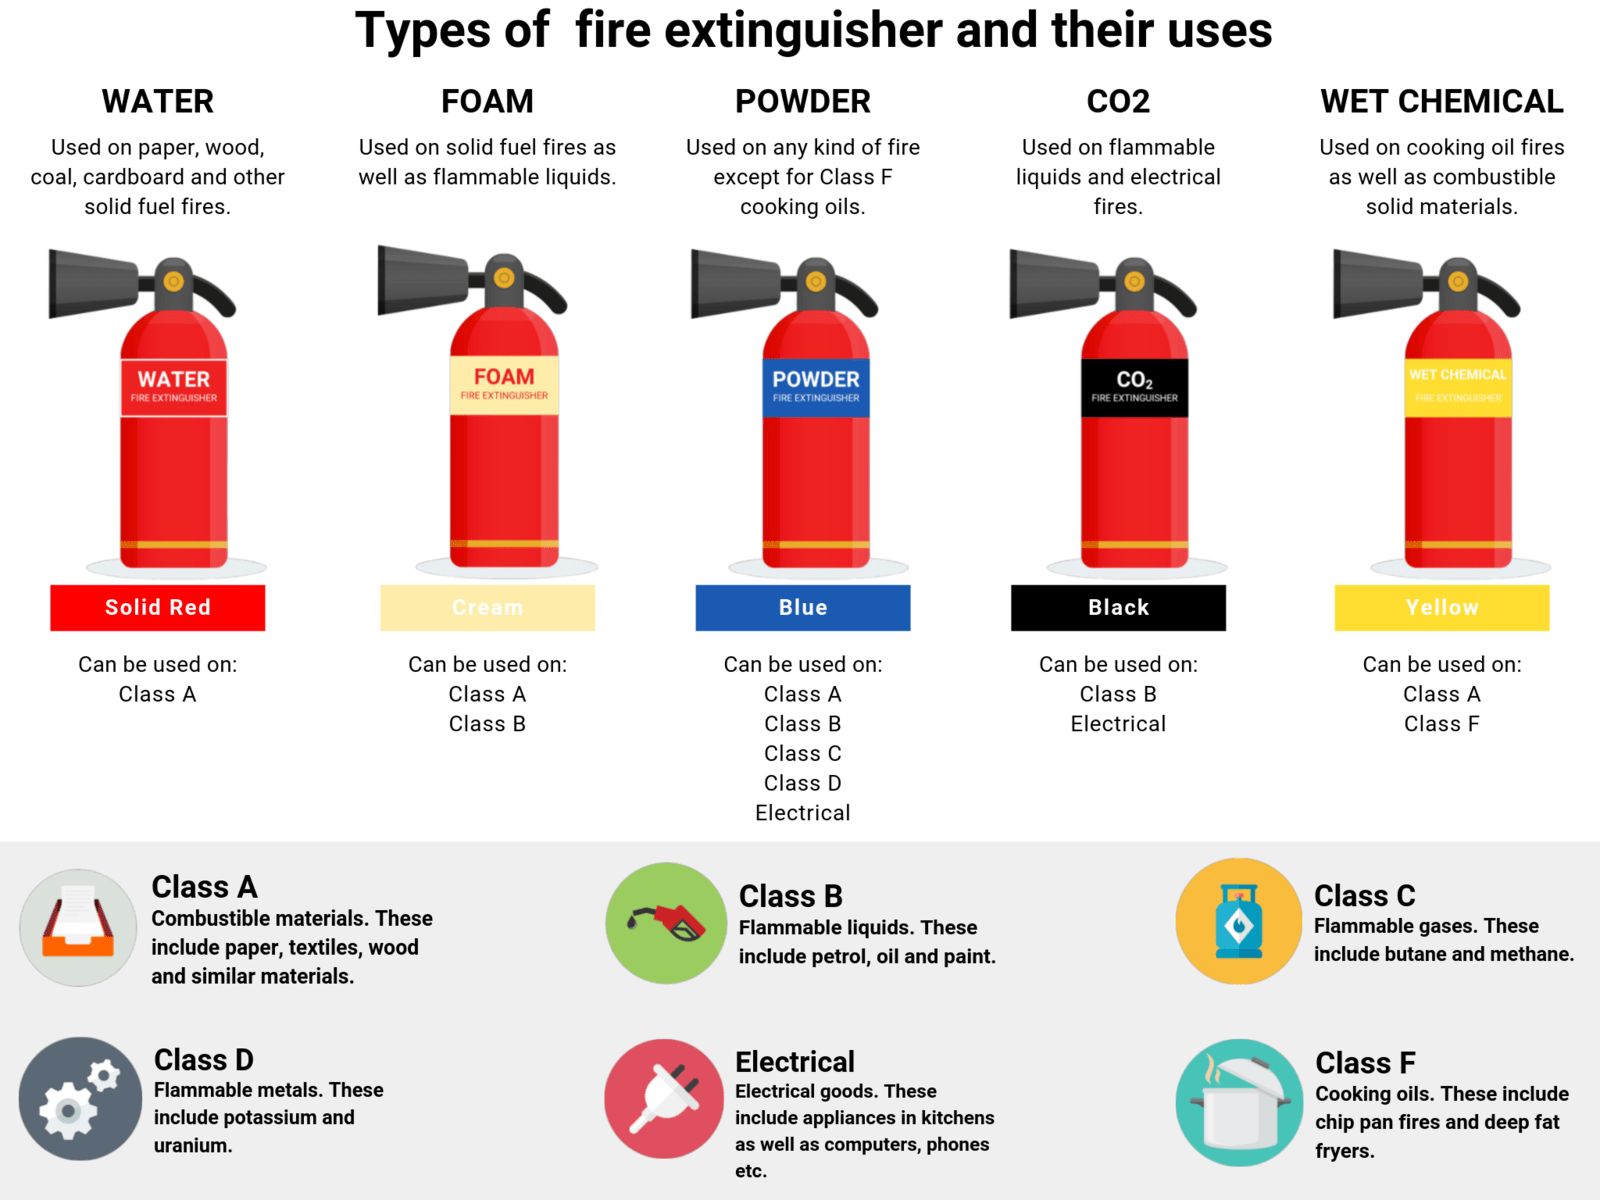 Fire extinguishers and their uses graphic